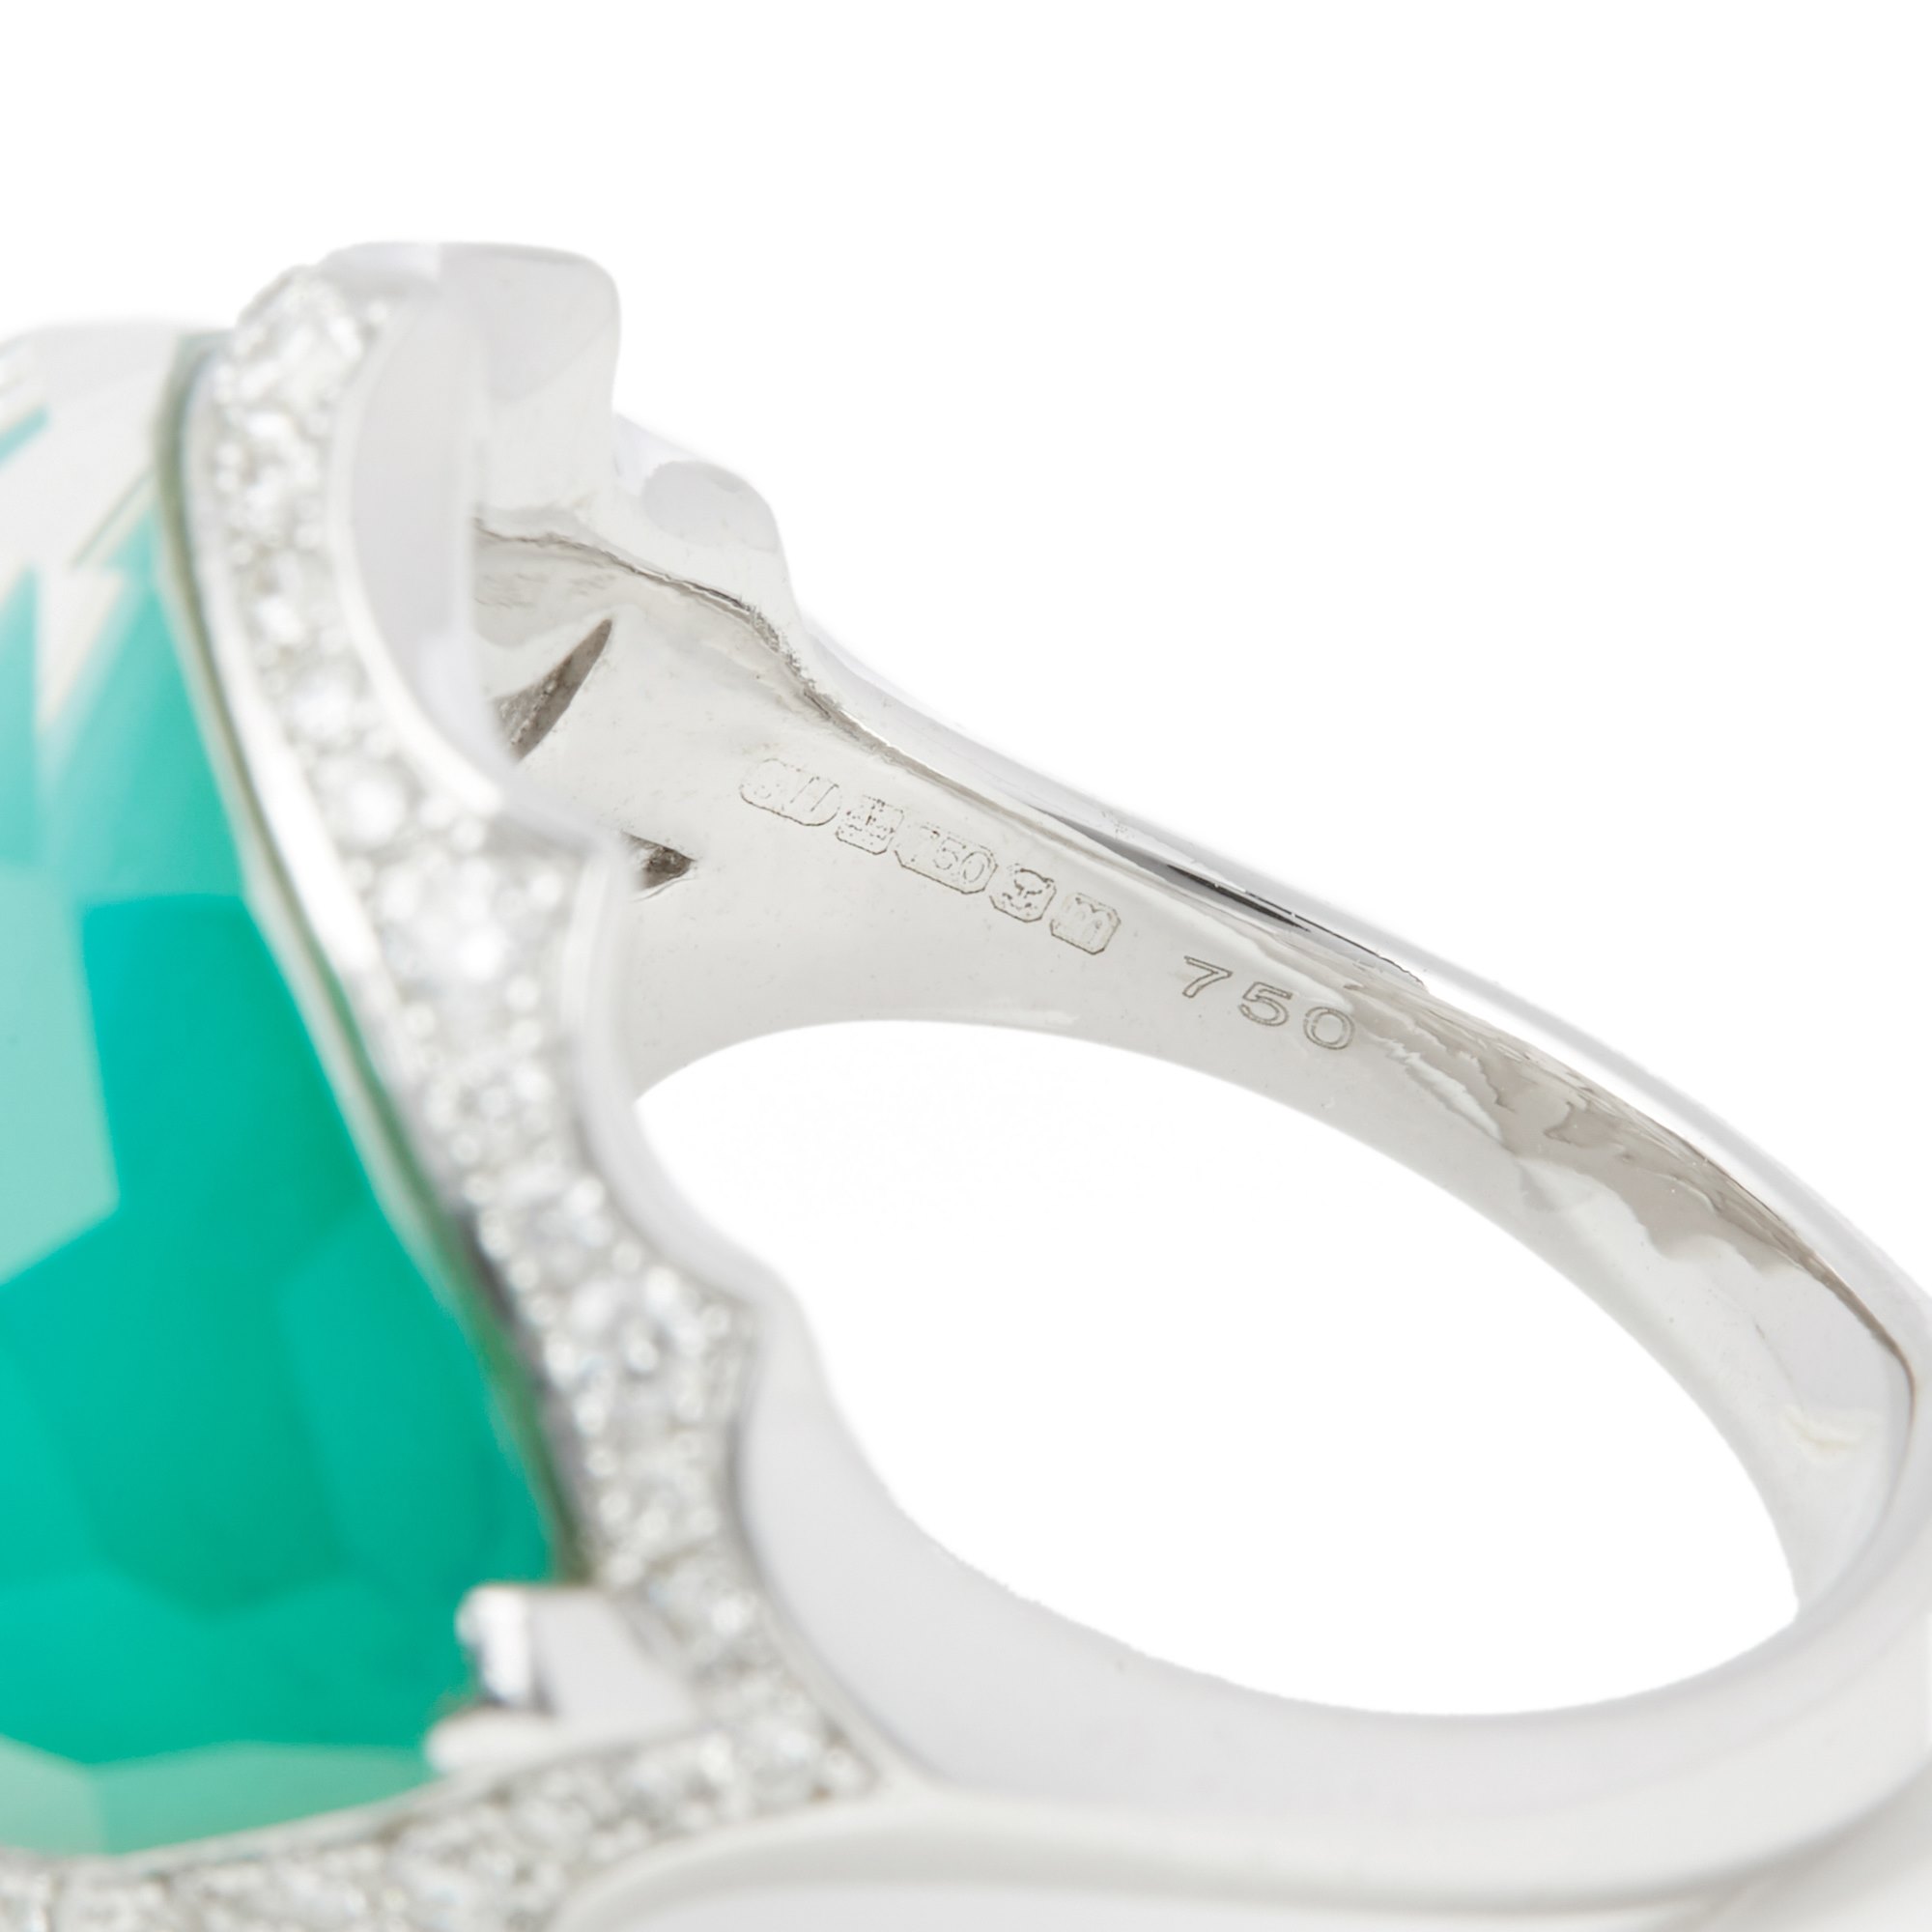 Stephen Webster 18ct White Gold Murder She Wrote Green Agate and Diamond Ring